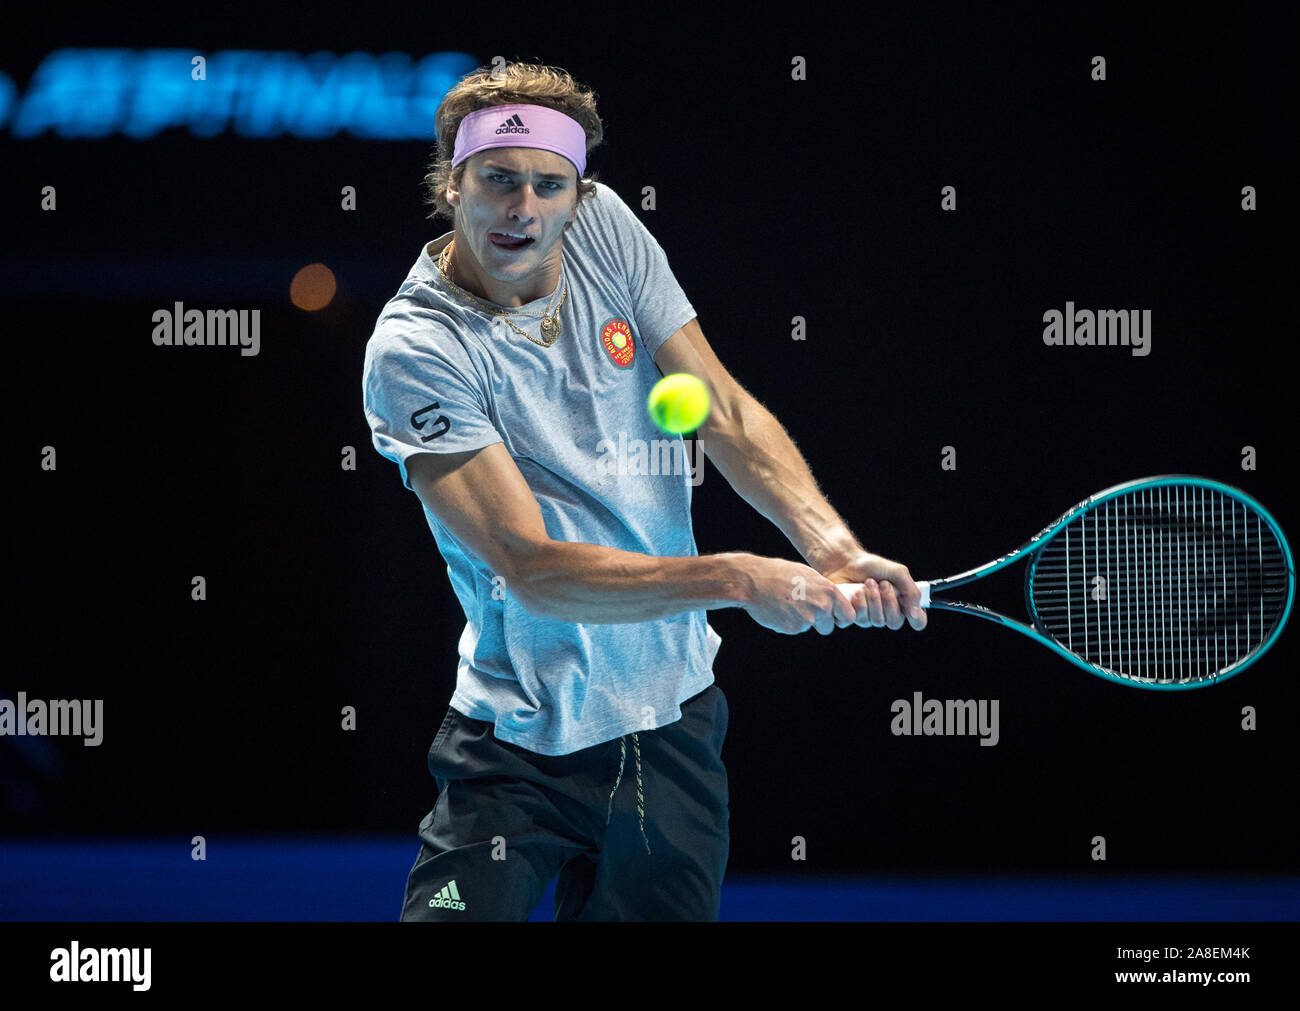 London, UK. 08th Nov, 2019. Alexander ZVEREV of Germany during practice at  the Nitto ATP Finals Tennis London MEDIA DAY at the O2, London, England on  8 November 2019. Photo by Andy